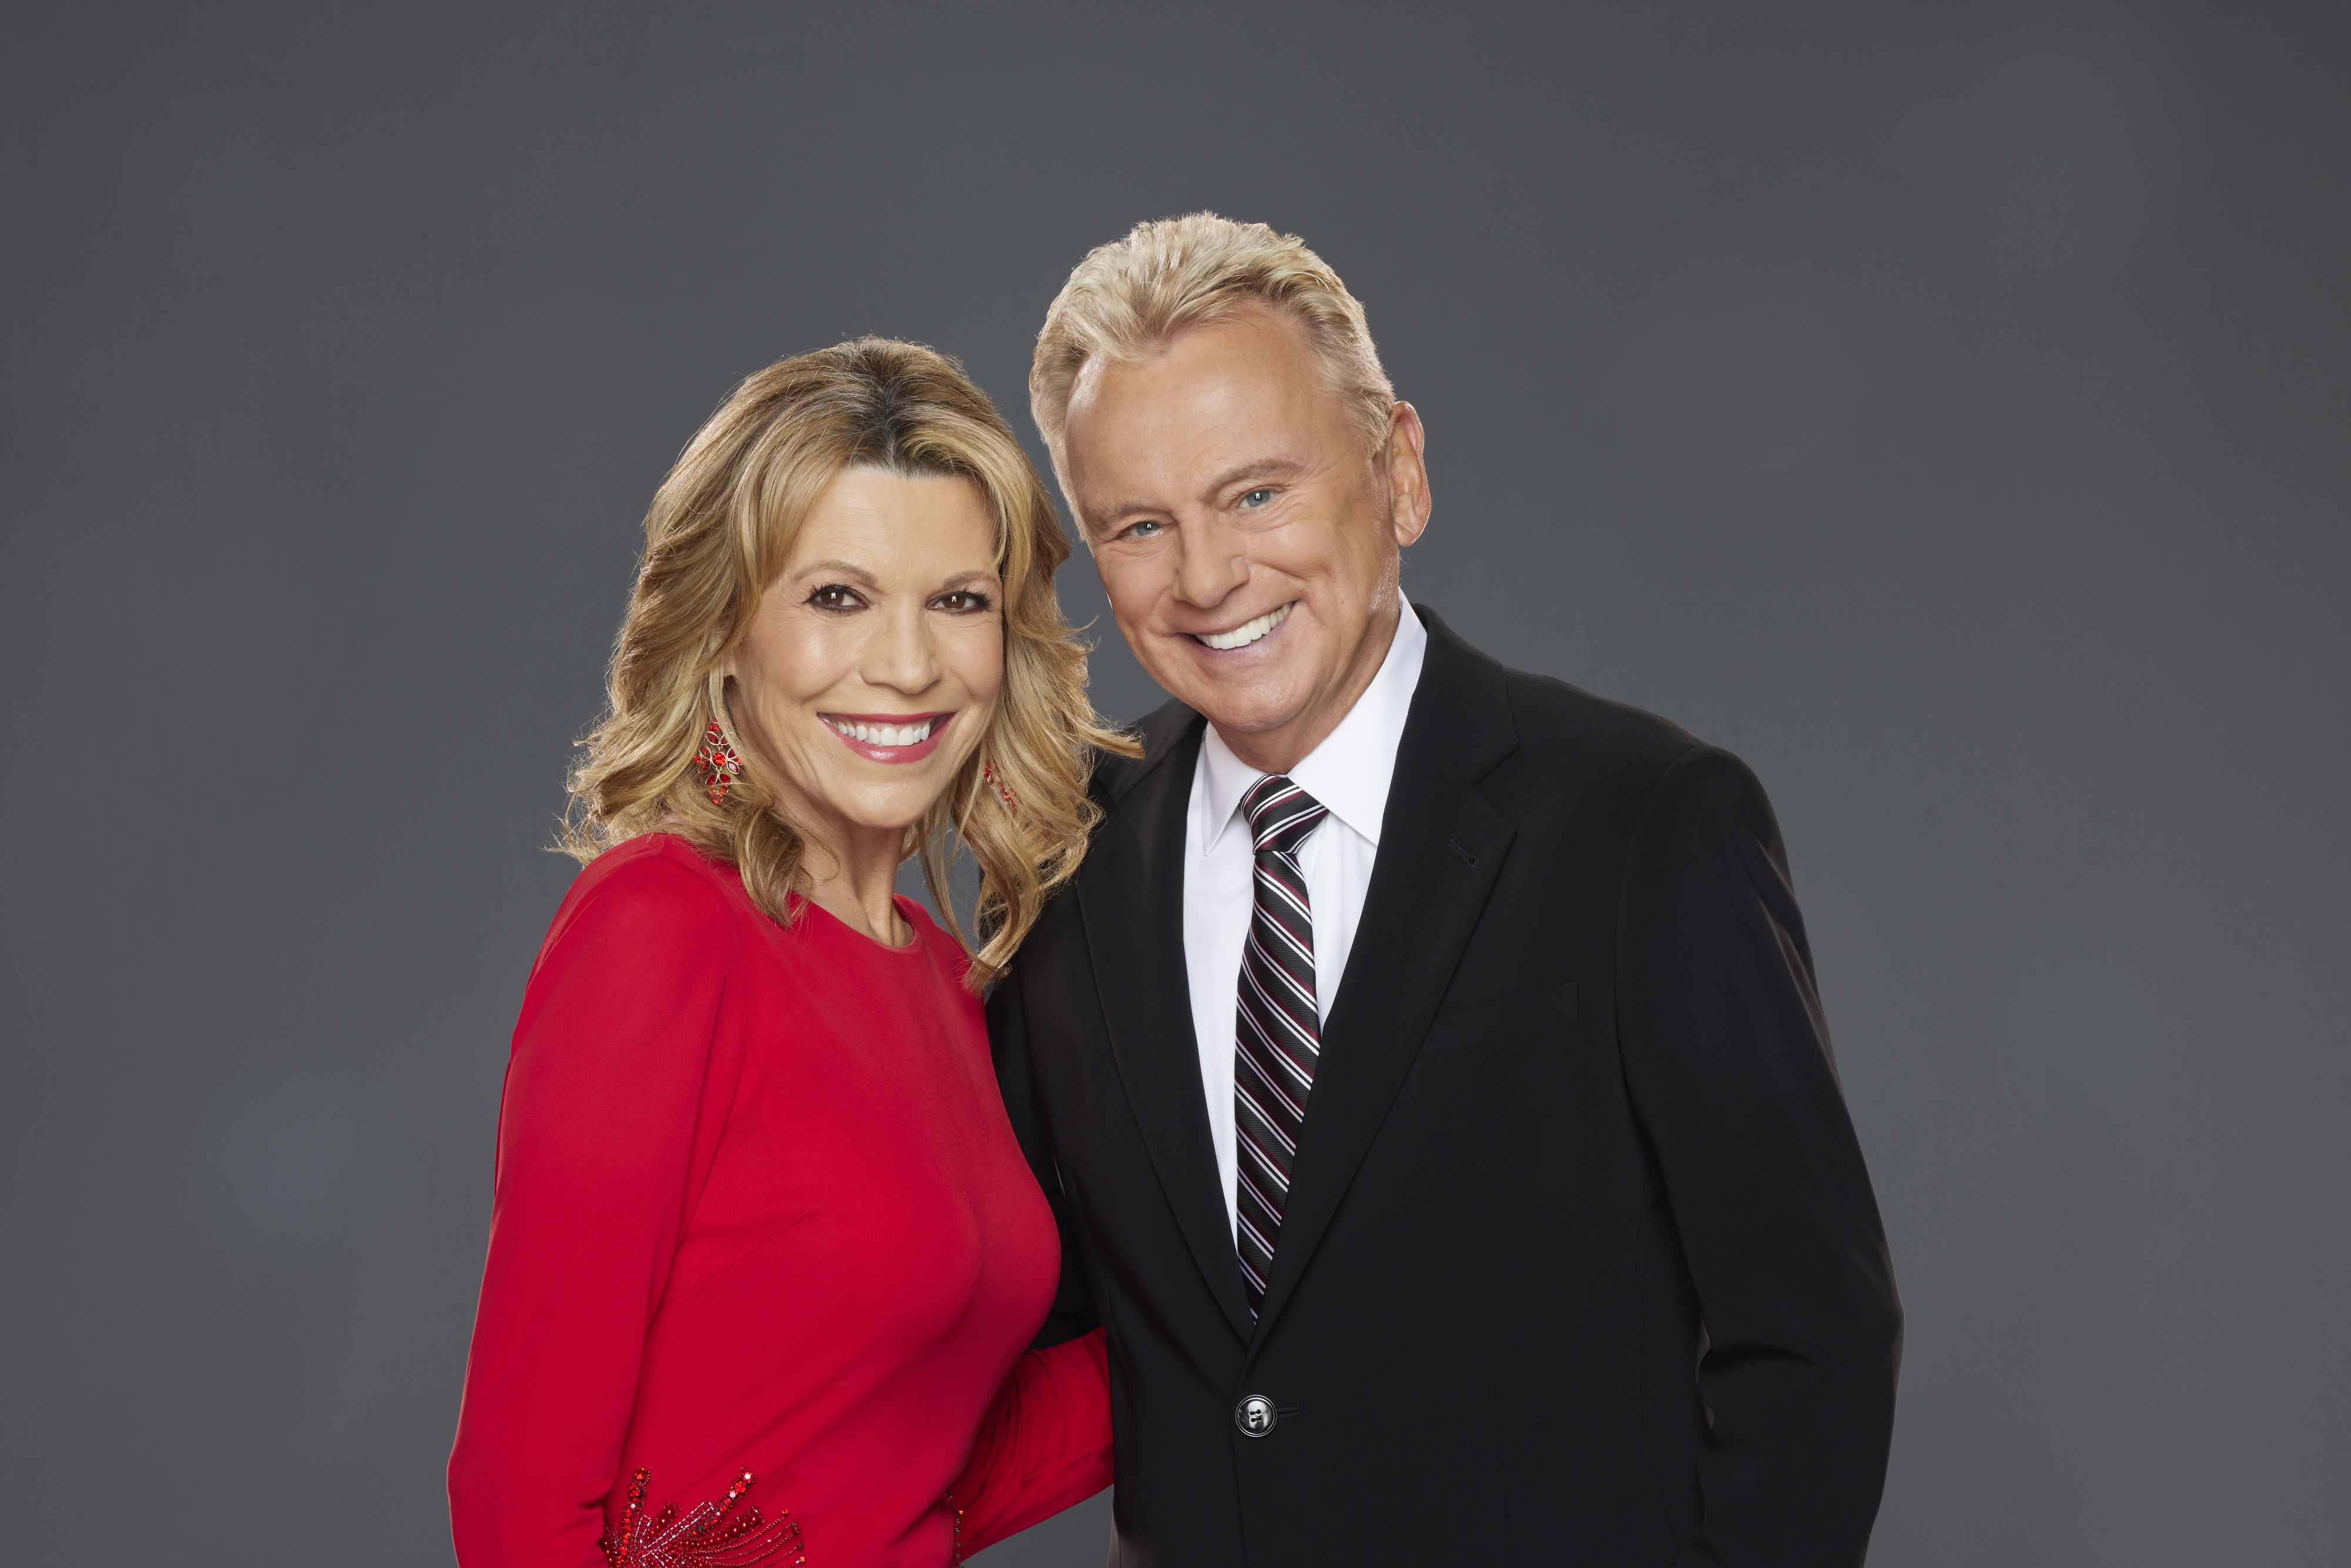 Pat and Vanna smile as they pose together for a promo photo